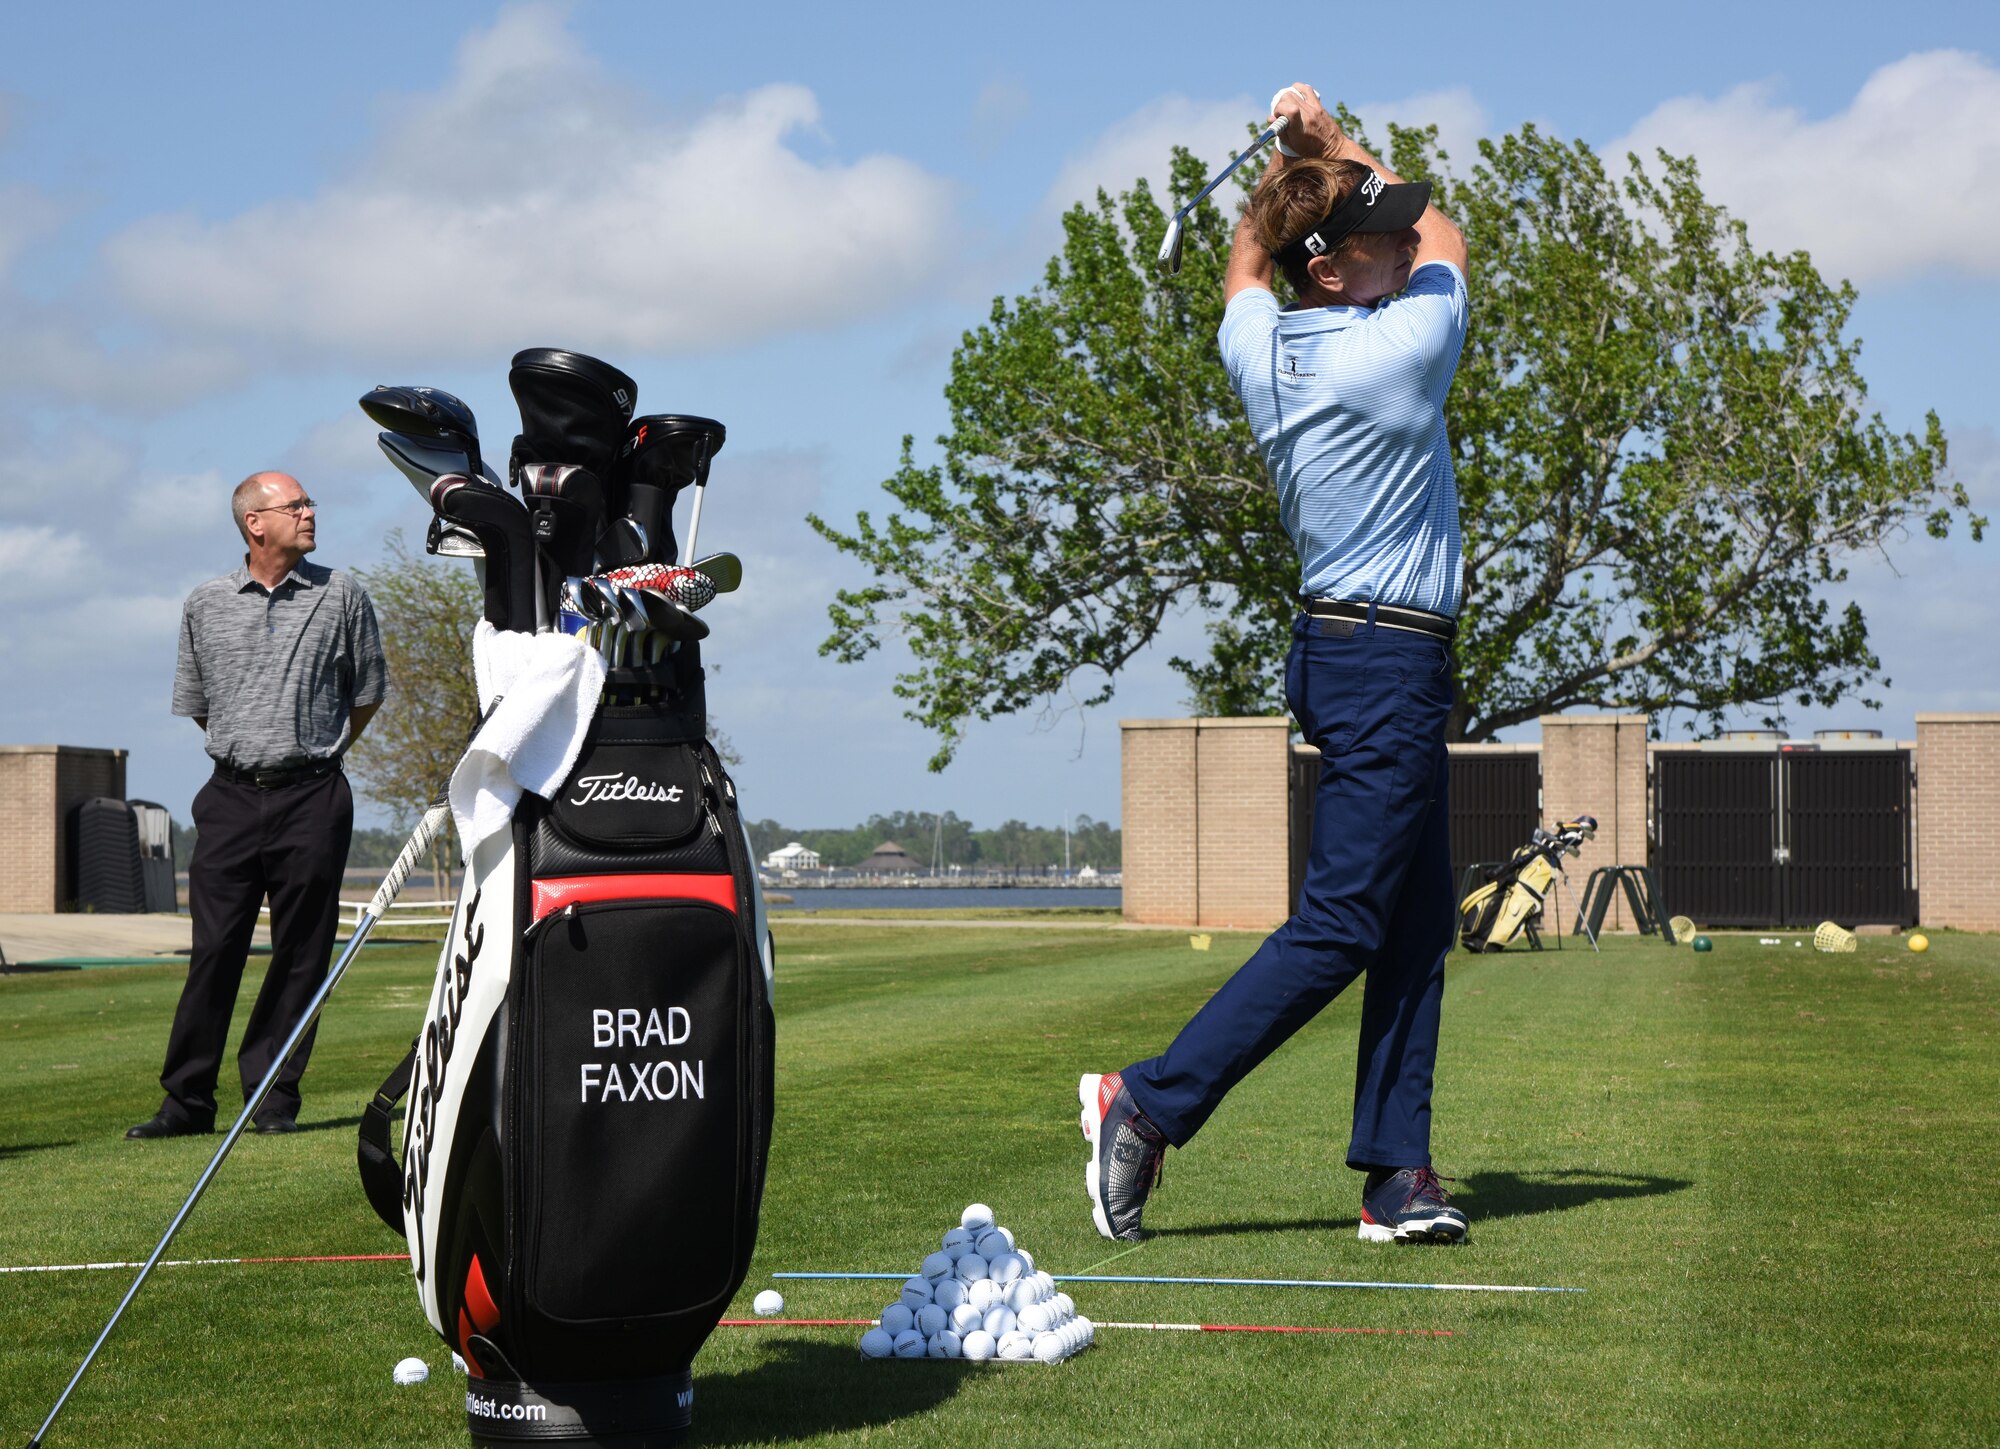 Brad Faxon, Professional Golfers’ Association champion player, provides golfing tips to Keesler personnel during a free clinic at the Bay Breeze Golf Course March 29, 2017, on Keesler Air Force Base, Miss. Faxon is an eight-time PGA Tour Champion and this is the third time he has held a clinic at Keesler. (U.S. Air Force photo by Kemberly Groue)